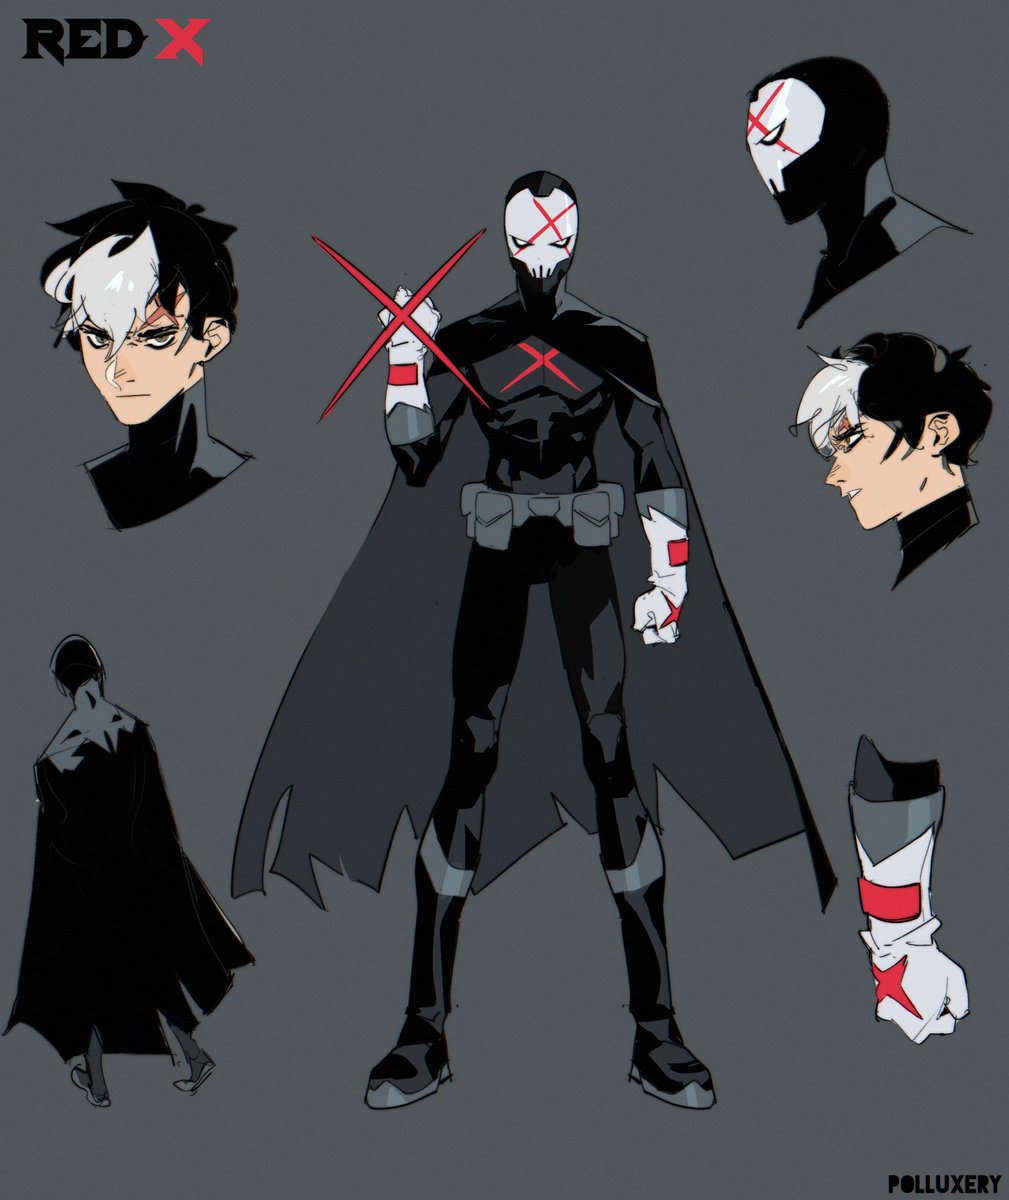 Red X redesign